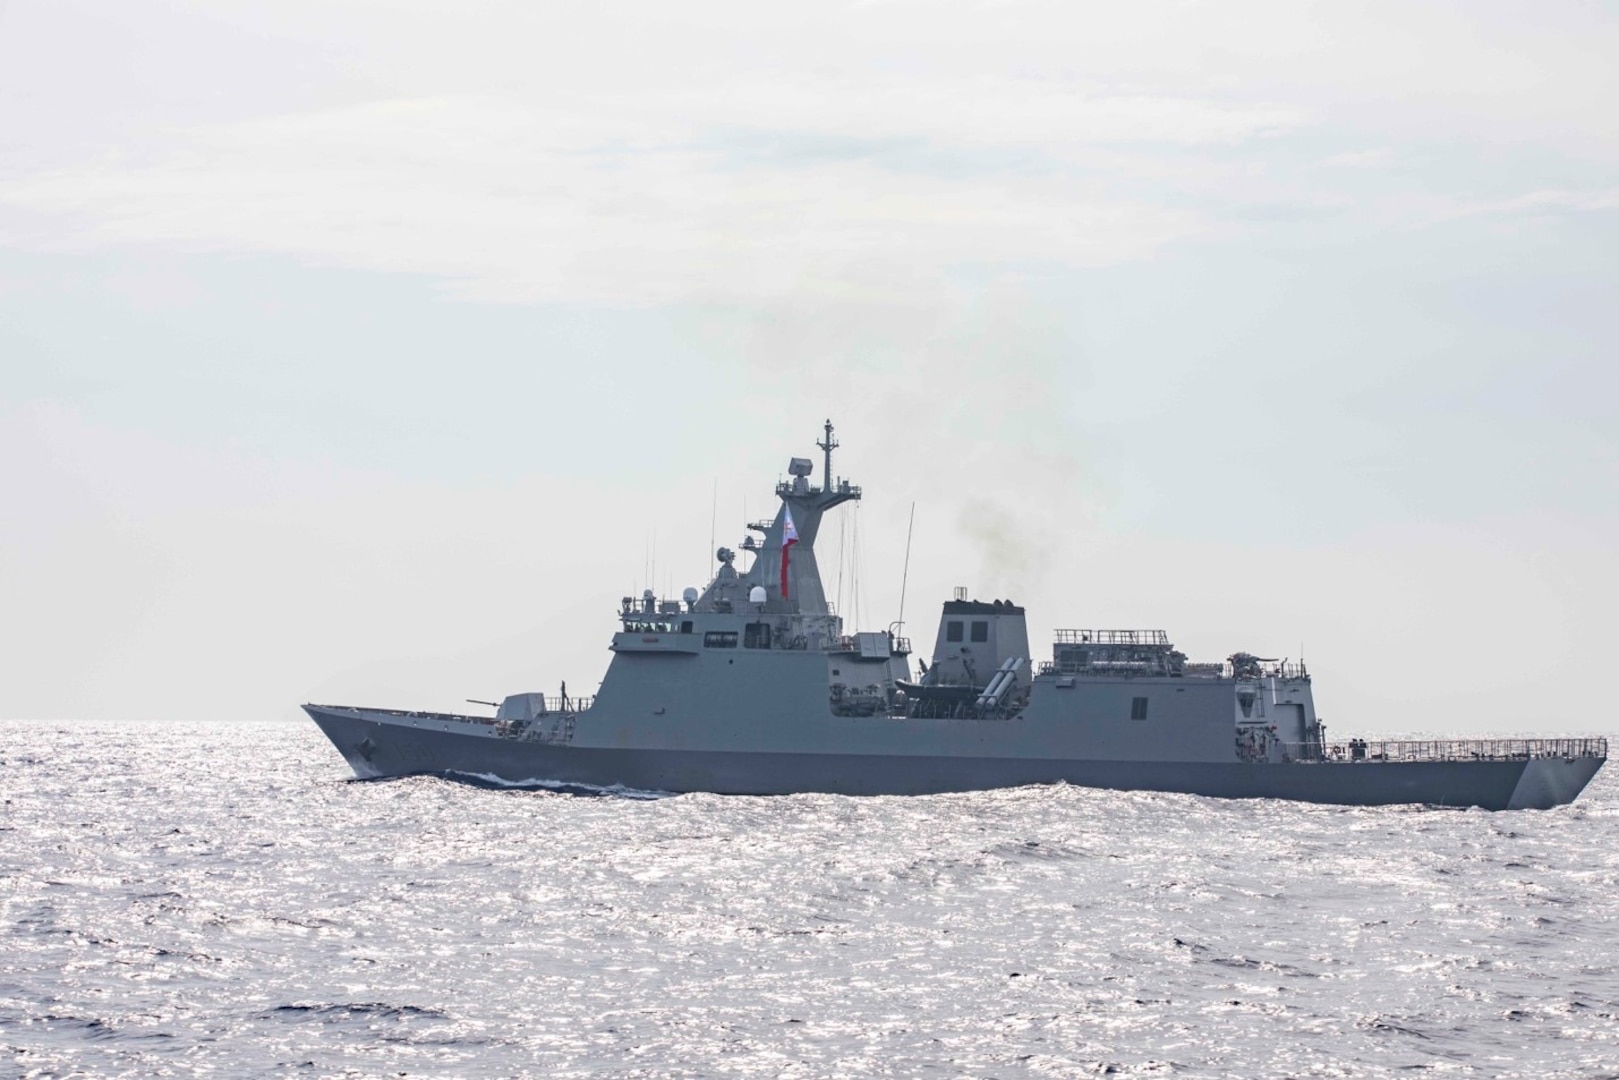 230904-N-NF288-008 SOUTH CHINA SEA (Sep. 04, 2023) The Arleigh Burke-class guided-missile destroyer USS Ralph Johnson (DDG 114) sails alongside the Republic of the Philippines Navy ship BRP Jose Rizal (FF 150) during a bilateral sail in the South China Sea, Sep. 4. Ralph Johnson is assigned to Commander, Task Force 71/Destroyer Squadron (DESRON) 15, the Navy’s largest forward-deployed DESRON and the U.S. 7th Fleet’s principal surface force. (U.S. Navy photo by Mass Communication Specialist 1st Class Jamaal Liddell)